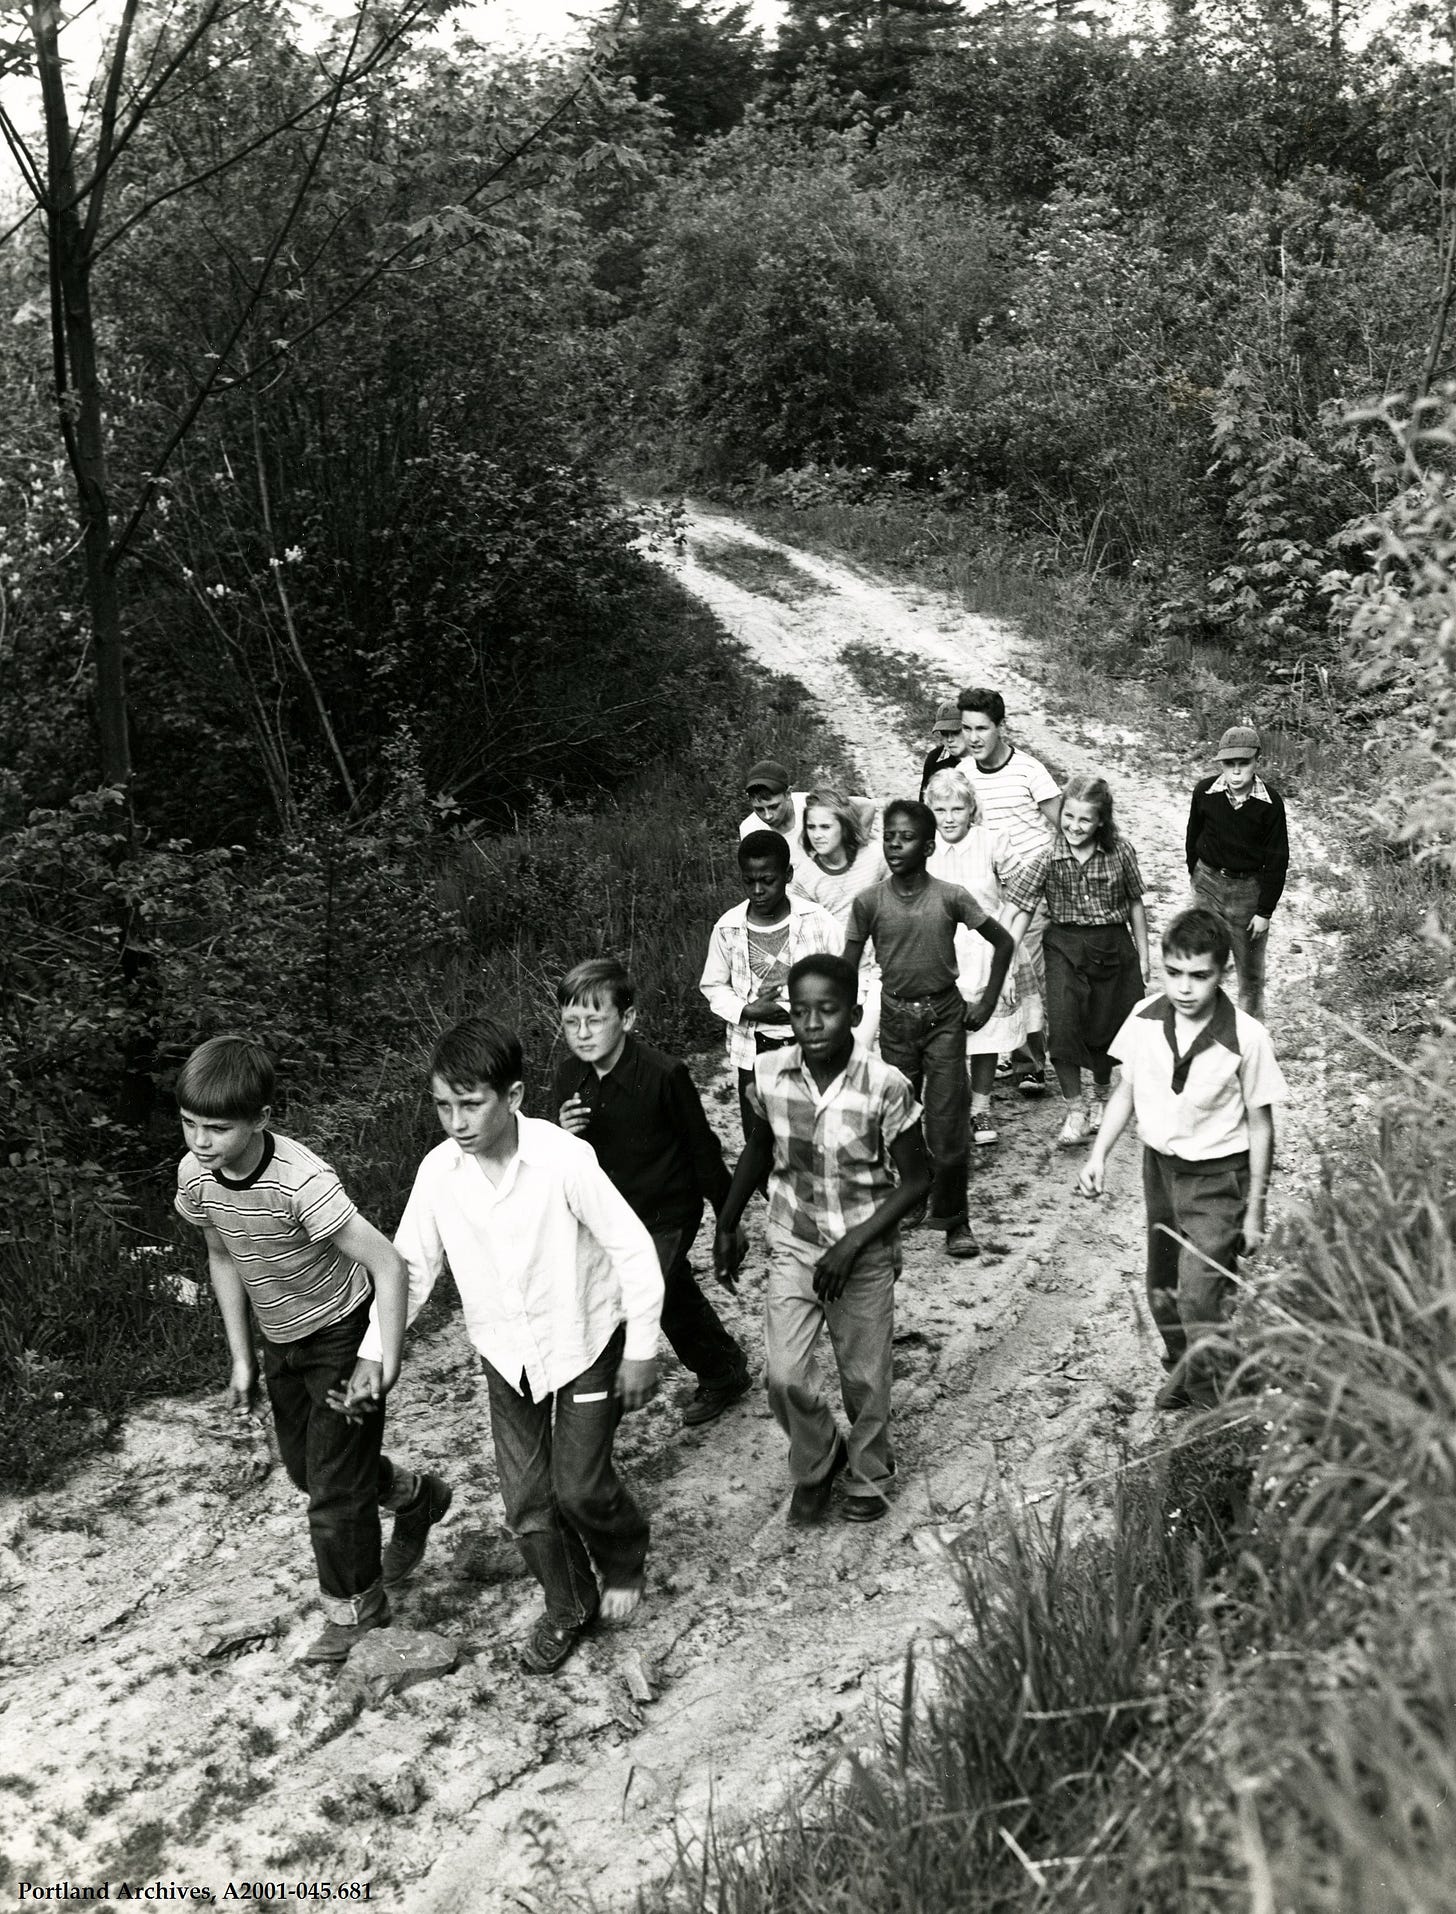 Black and white photo of kids walking in a forest